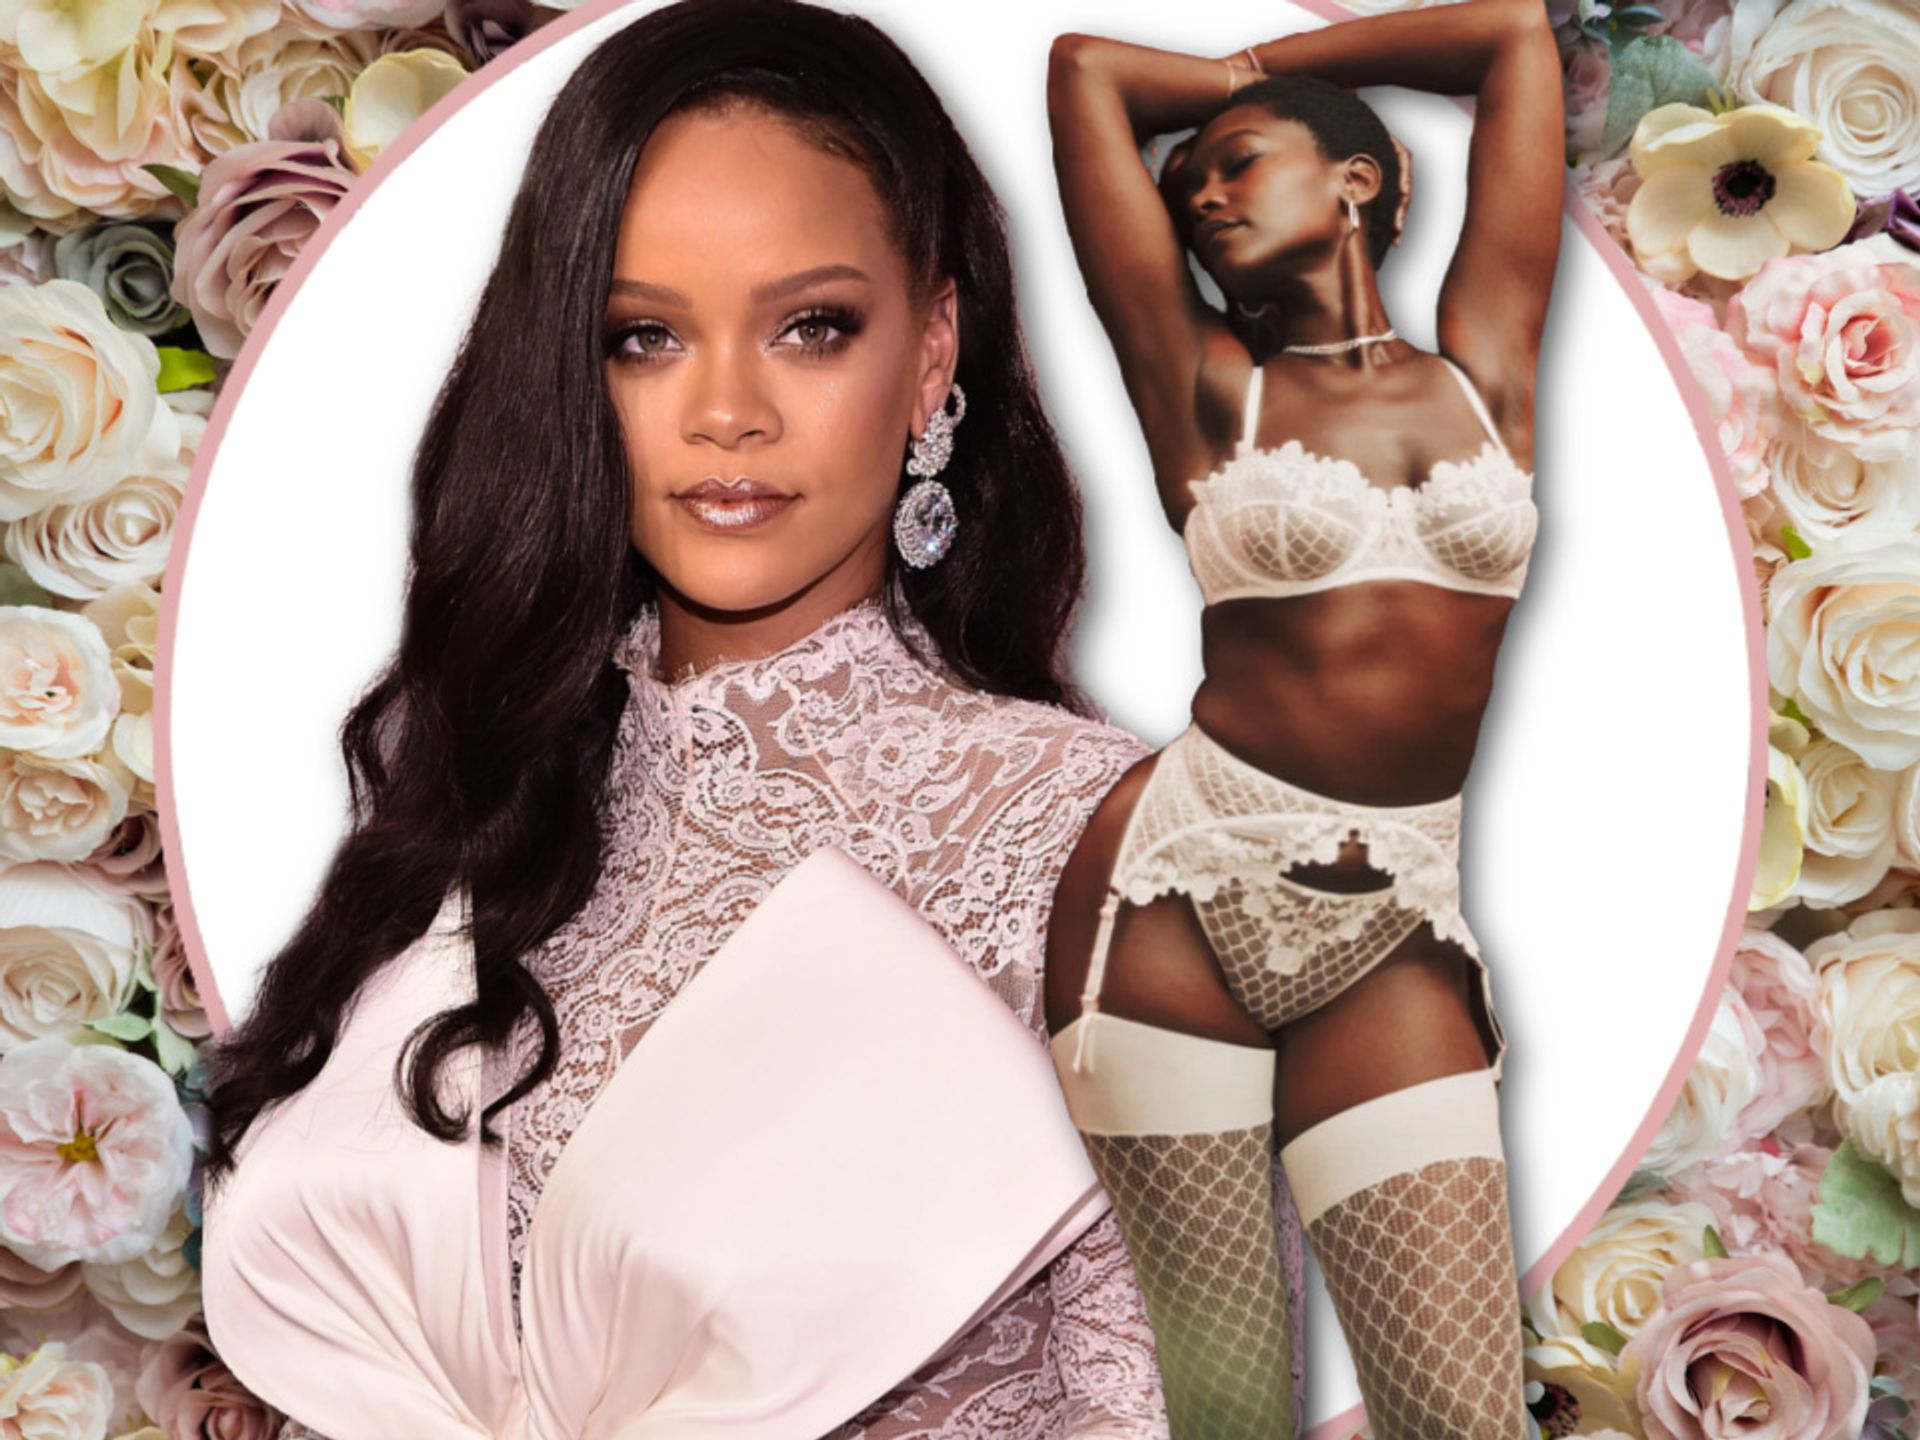 Rihanna's Savage x Fenty Lingerie Comes in All Shades of Nude